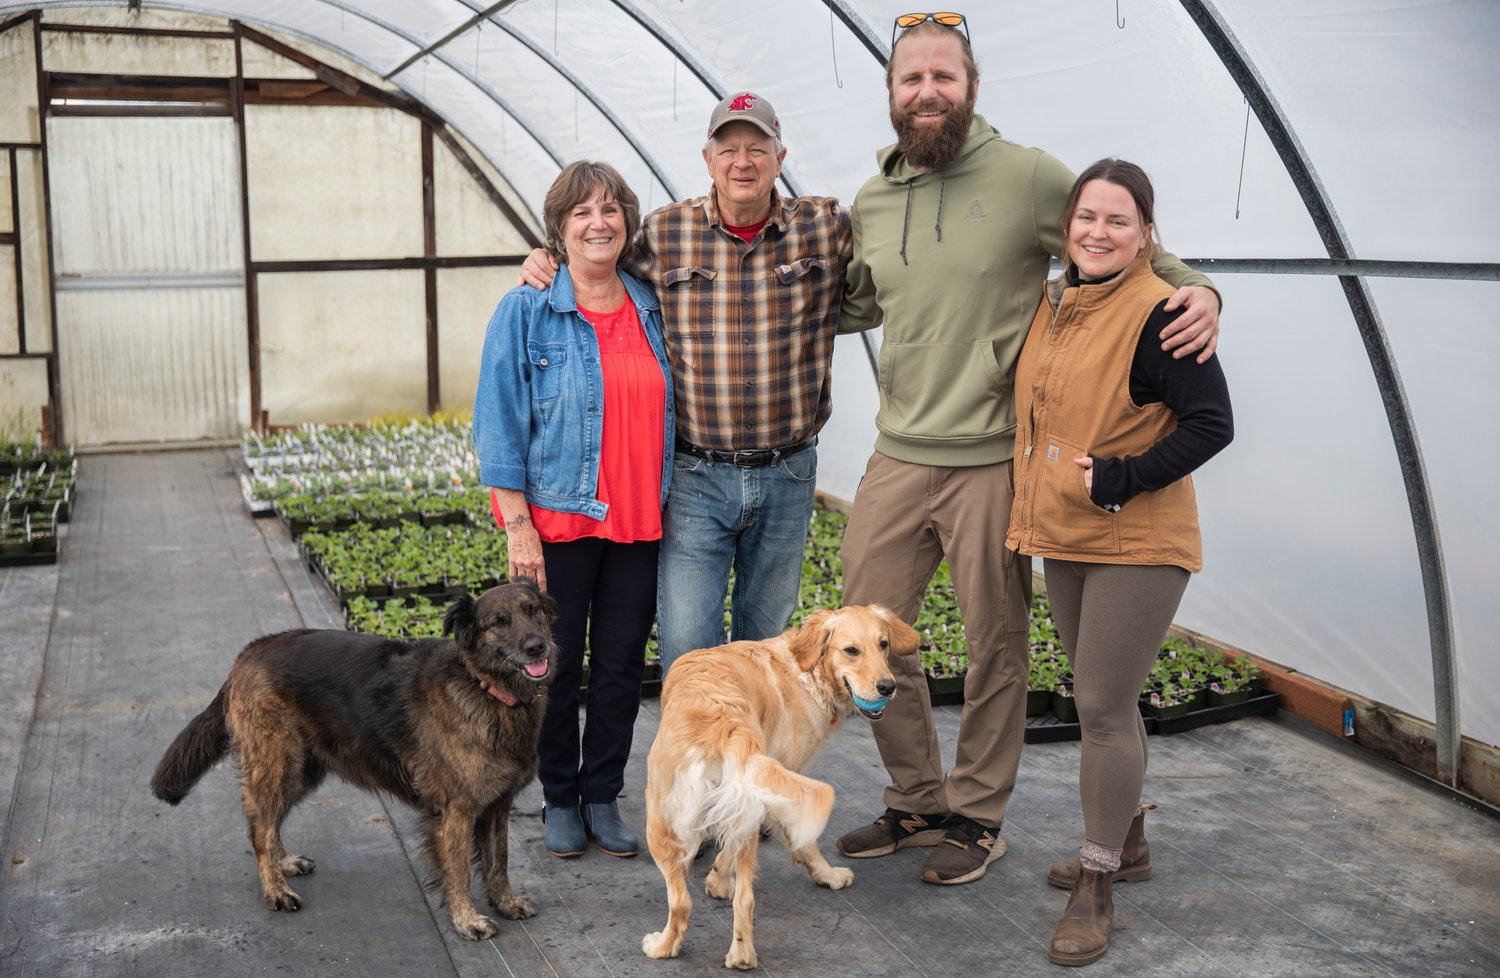 Connie and Spencer Davis pose for a photo alongside Kyle and Jena Aselton and their dogs Birdy and Willow at the Dirty Thumb Nursery along state Route 6 near Adna on Wednesday.